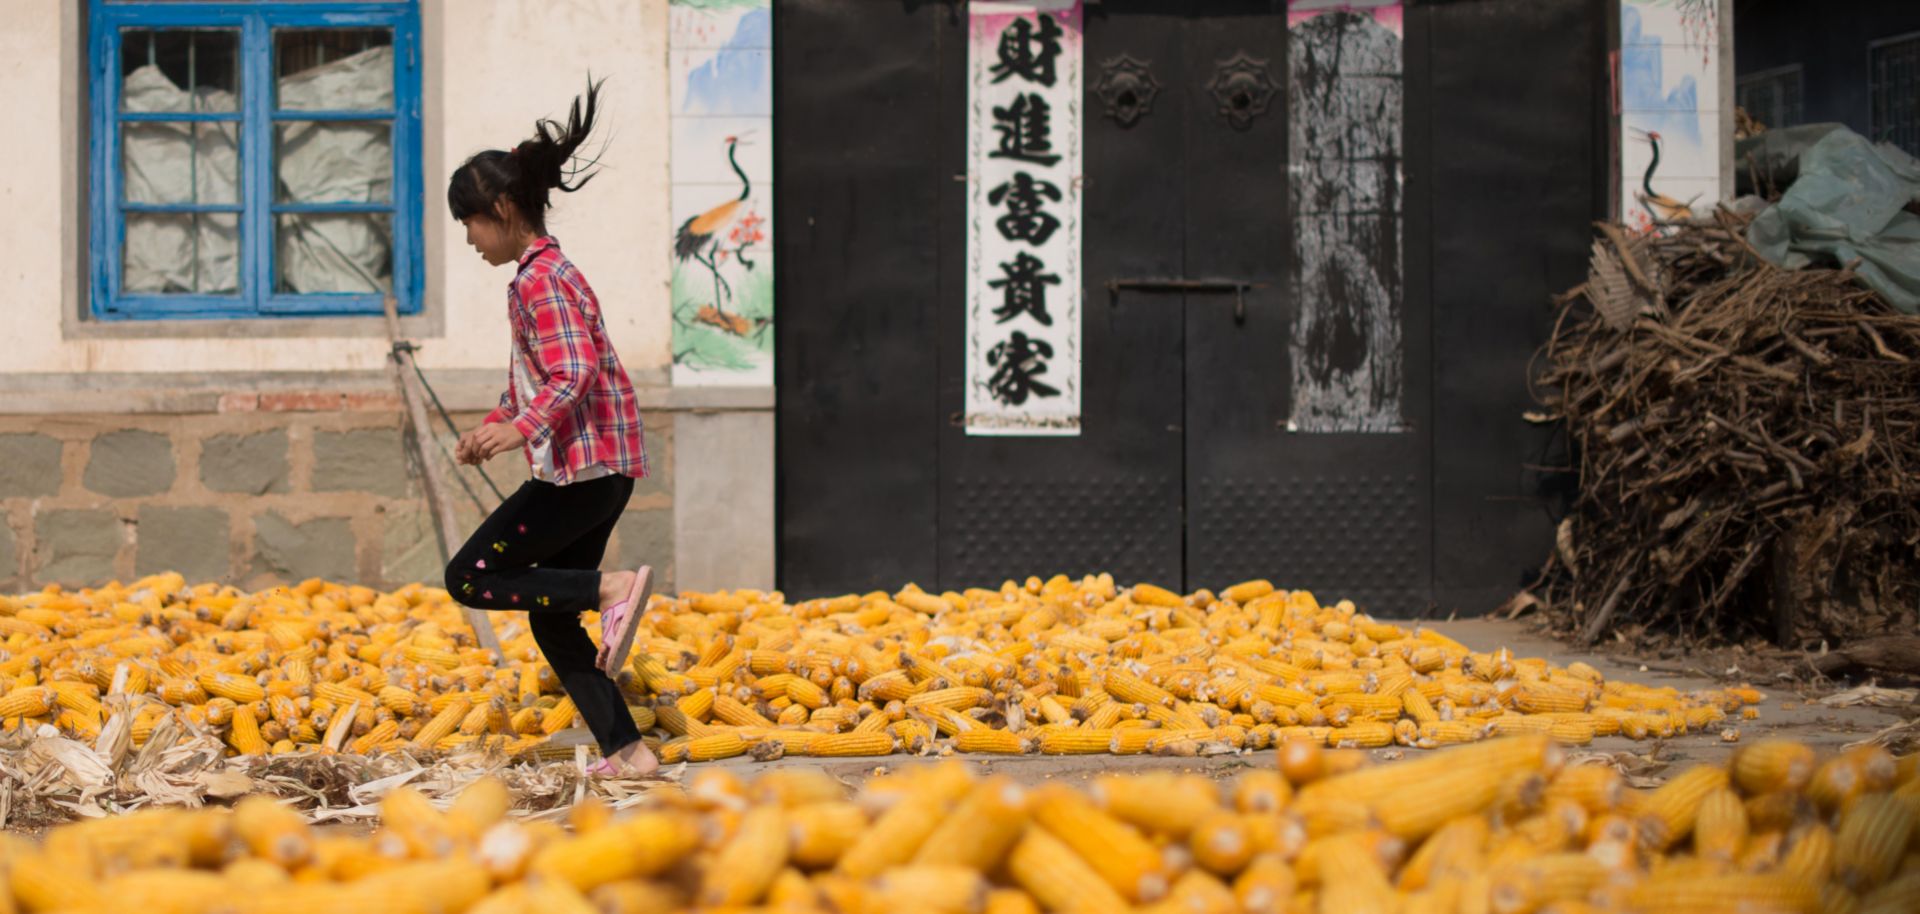 Chinese farming and crop production